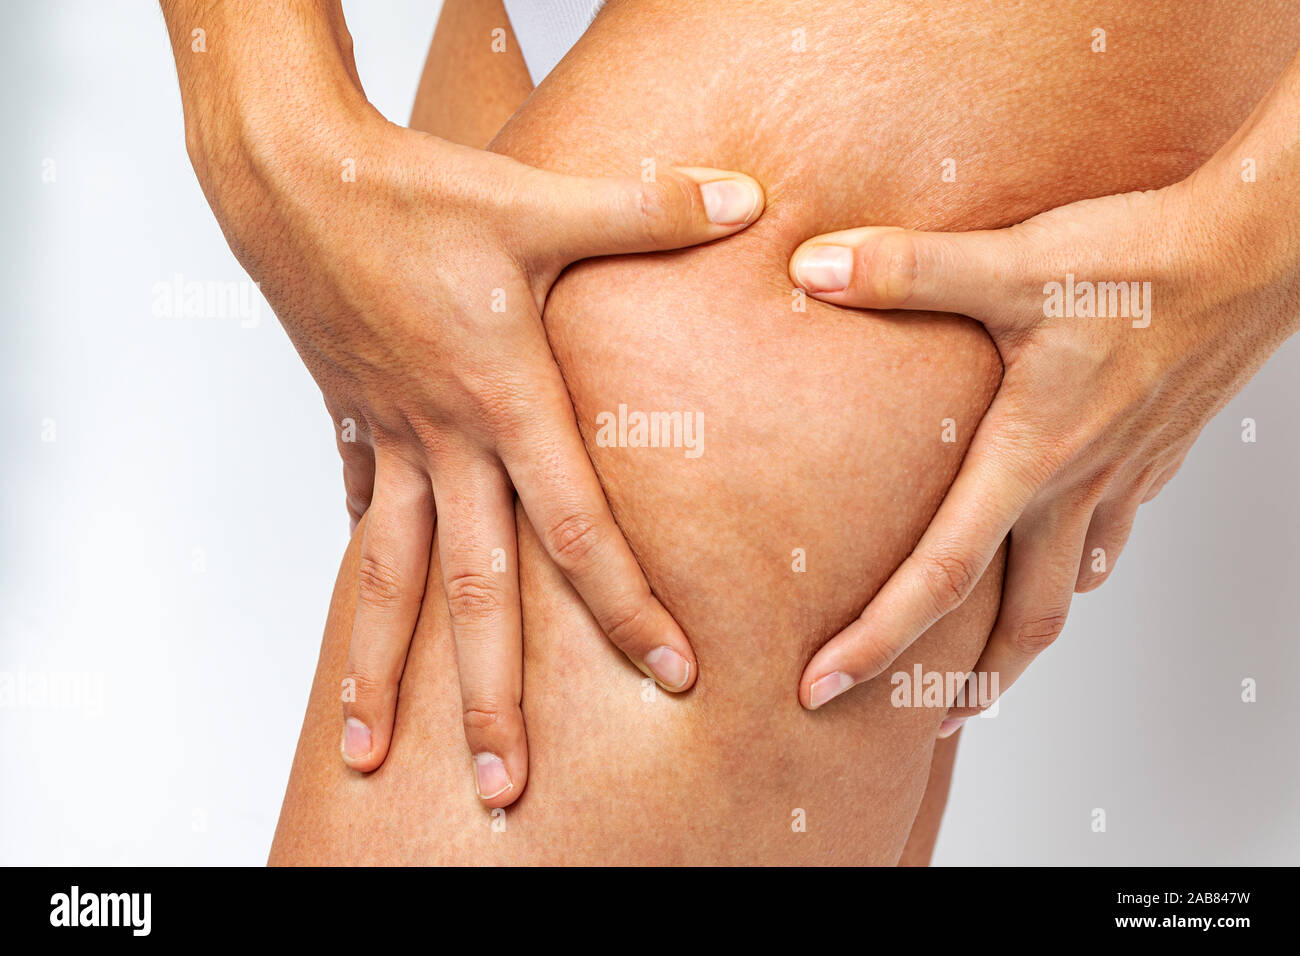 Close up of hands showing cellulite and stretch marks on female thigh. Stock Photo